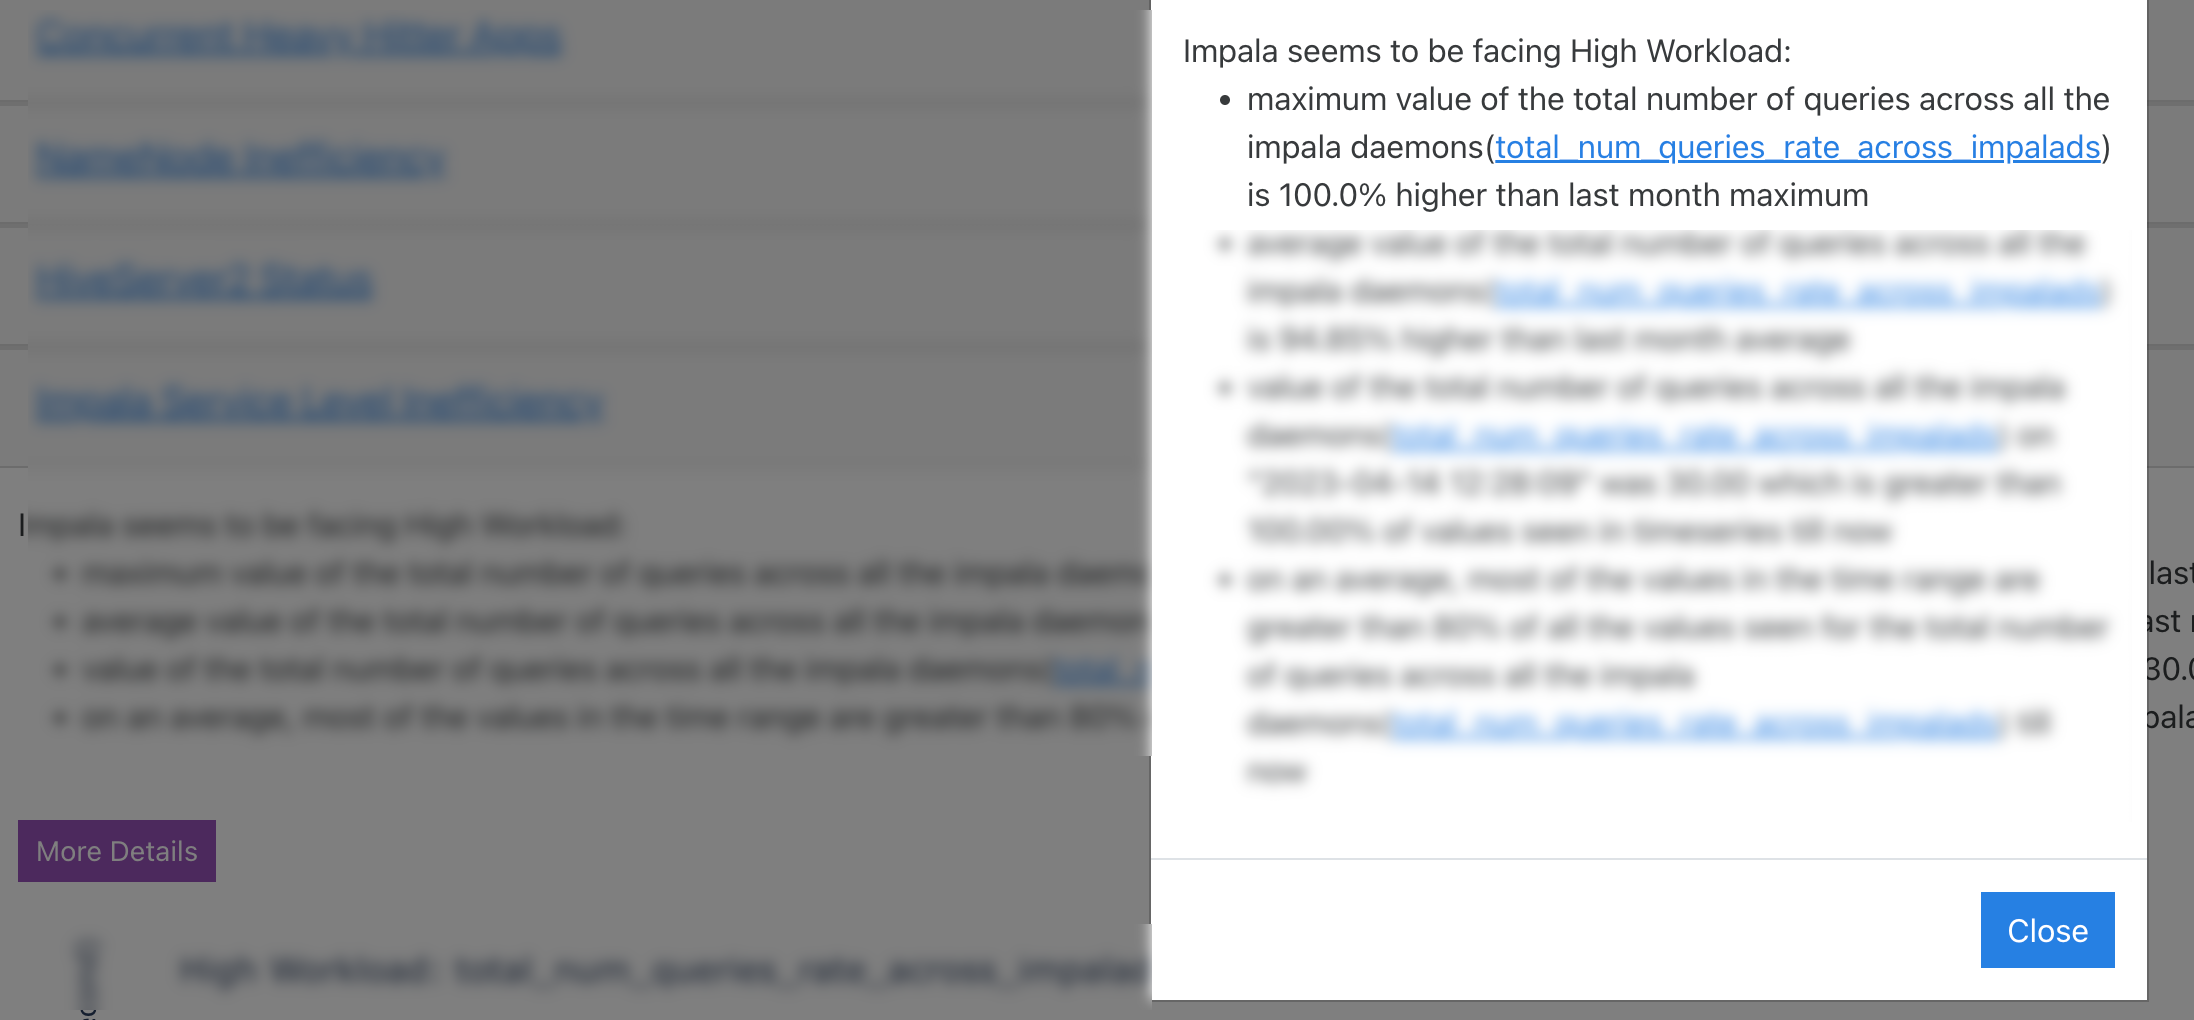 impala-service-level-inefficiency-more.png